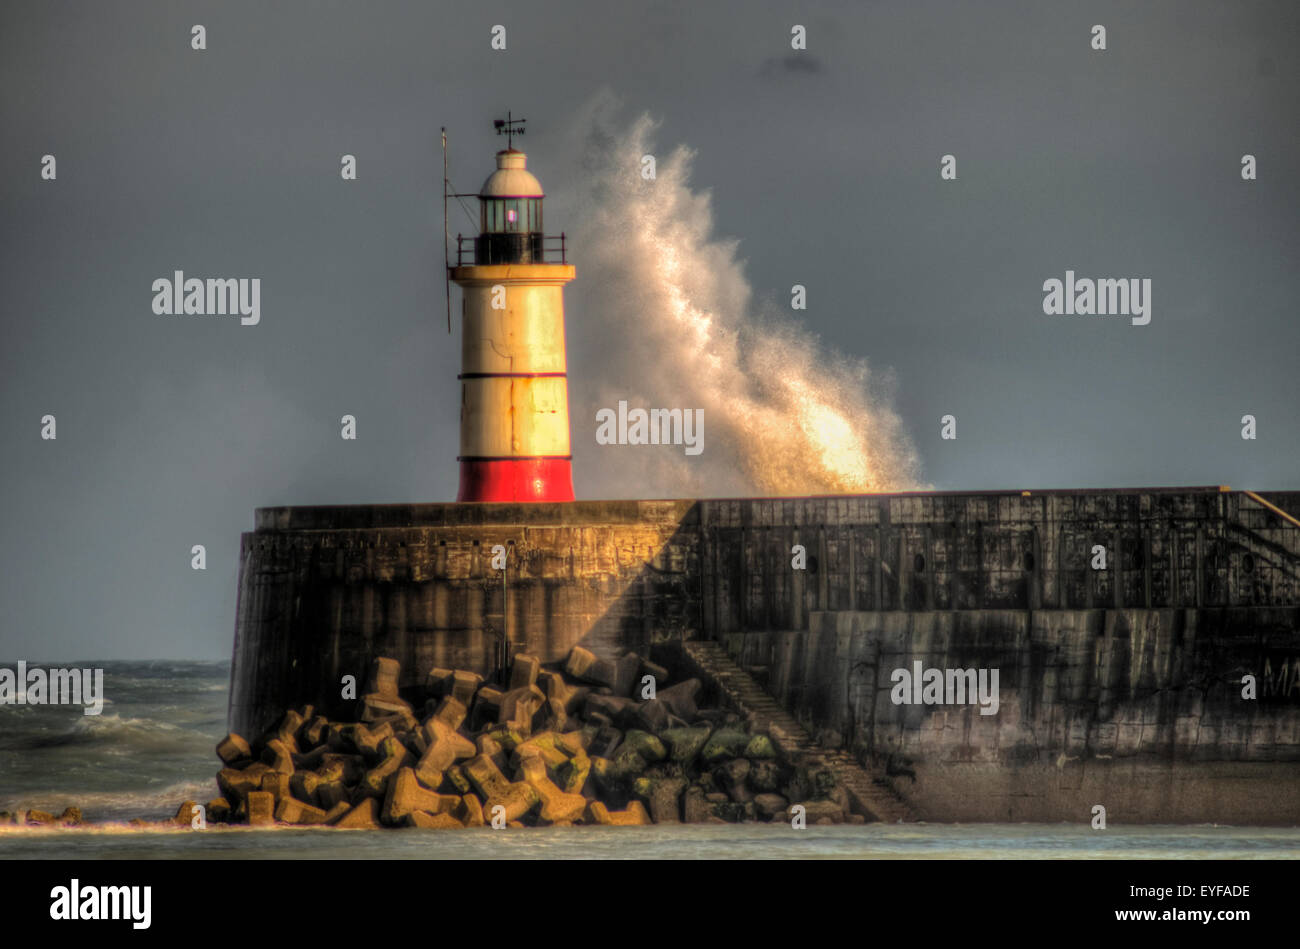 Newhaven, East Sussex, UK. 28th July, 2015. The Orange glow of Sunset light on the Lighthouse and waves driven by the strong wind..HDR Image Stock Photo